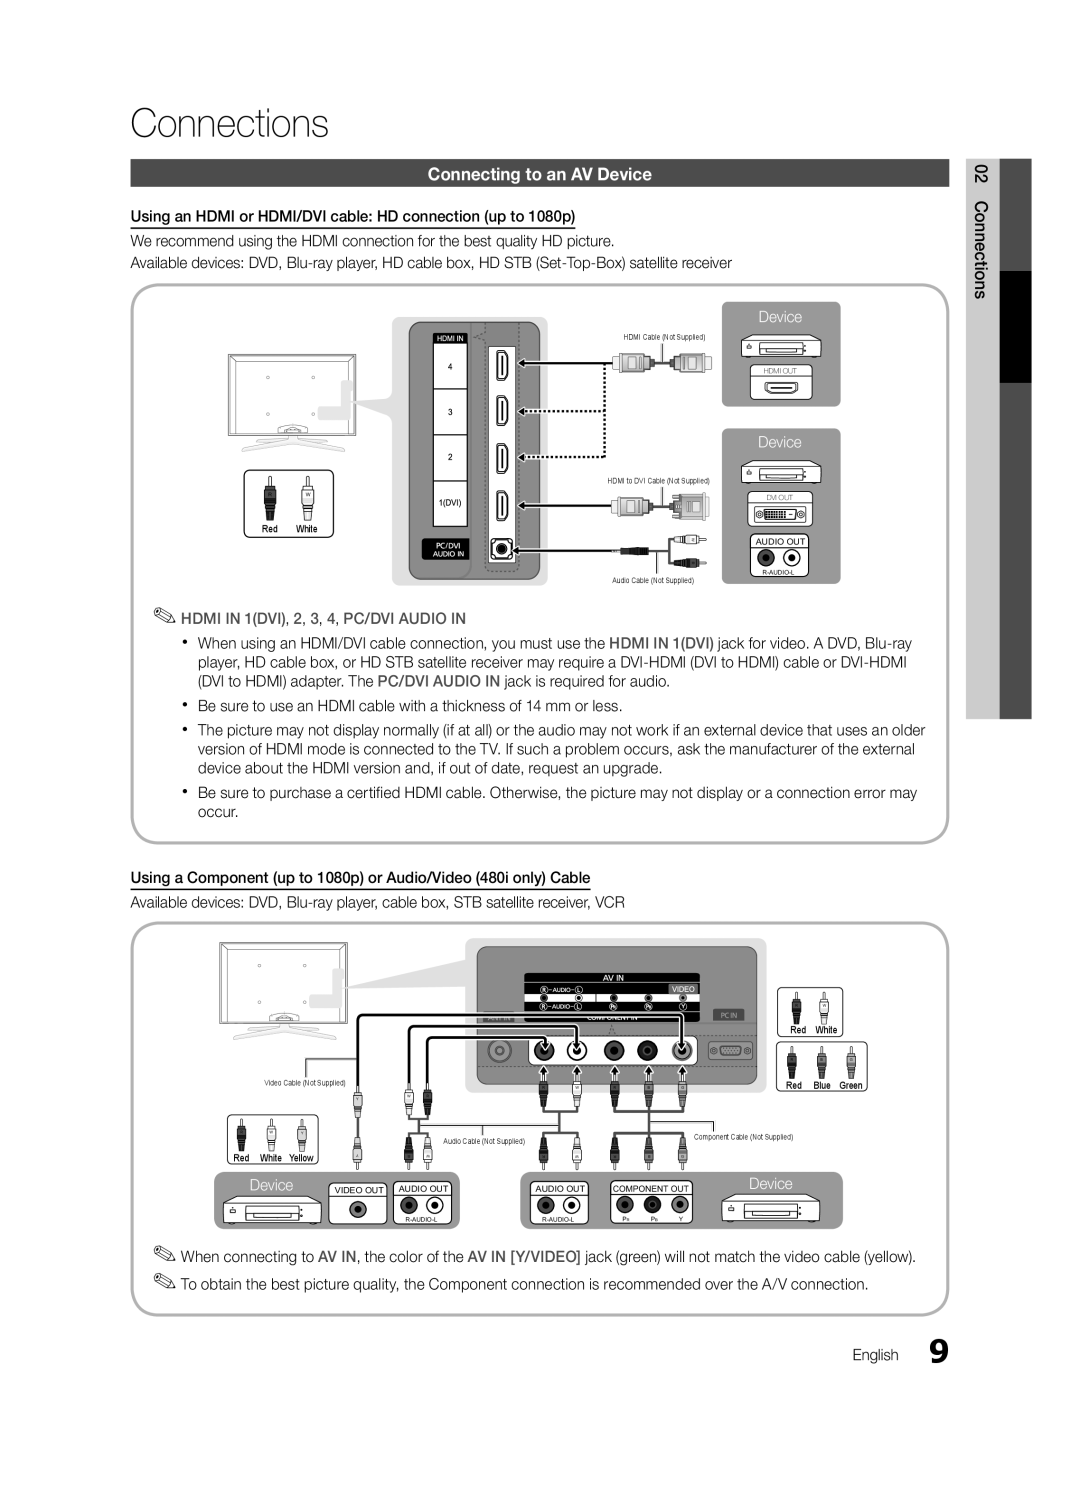 Samsung 6800 user manual Connections, Connecting to an AV Device, HDMI IN 1DVI, 2, 3, 4, PC/DVI AUDIO IN 